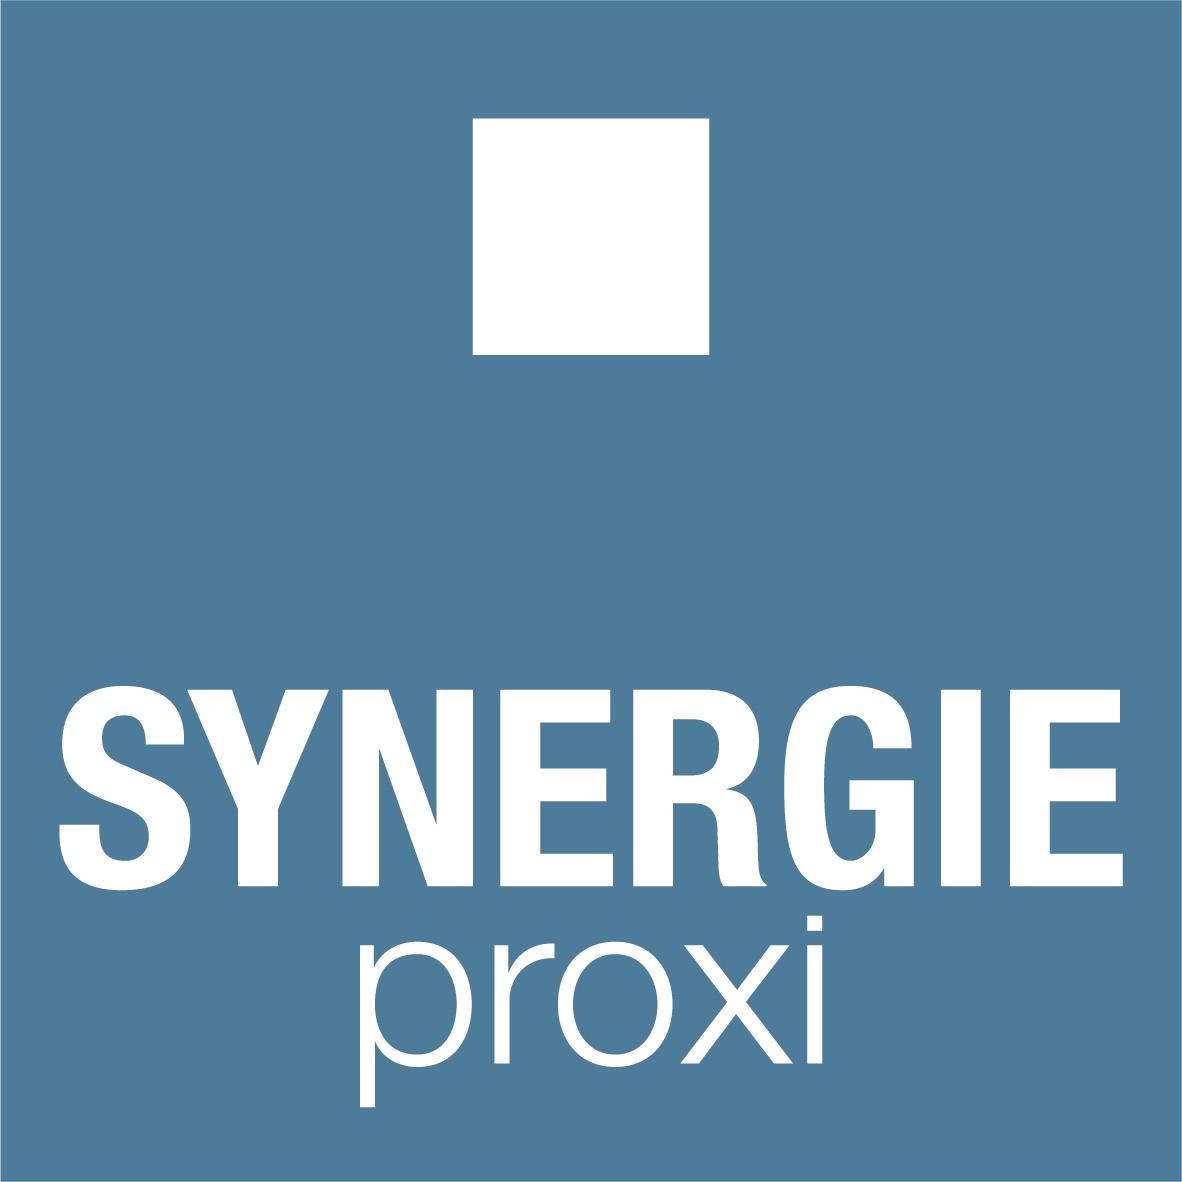 Synergie Douvrin